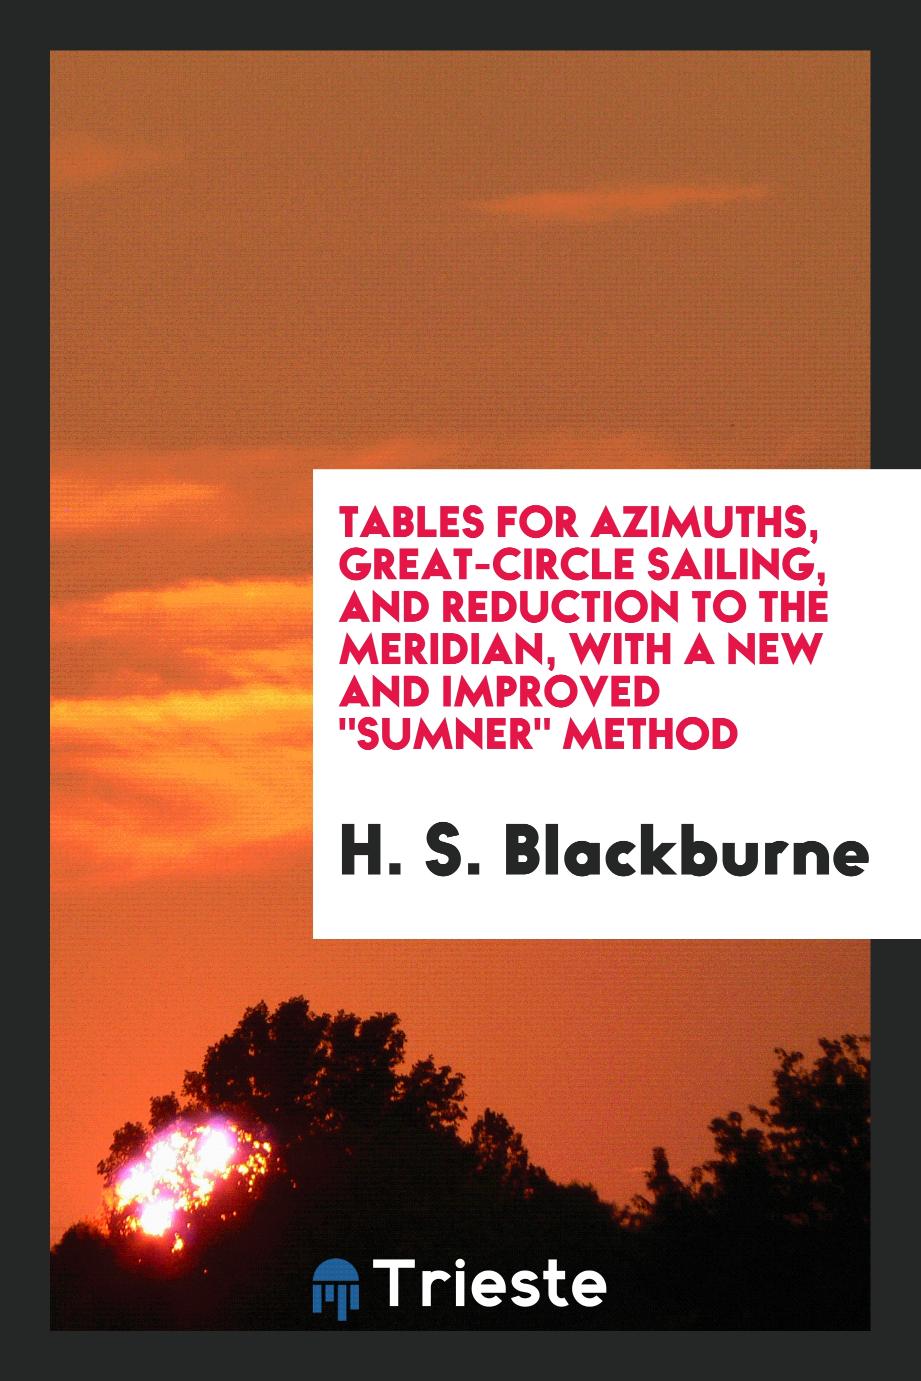 Tables for Azimuths, Great-Circle Sailing, and Reduction to the Meridian, with a New and Improved "Sumner" Method